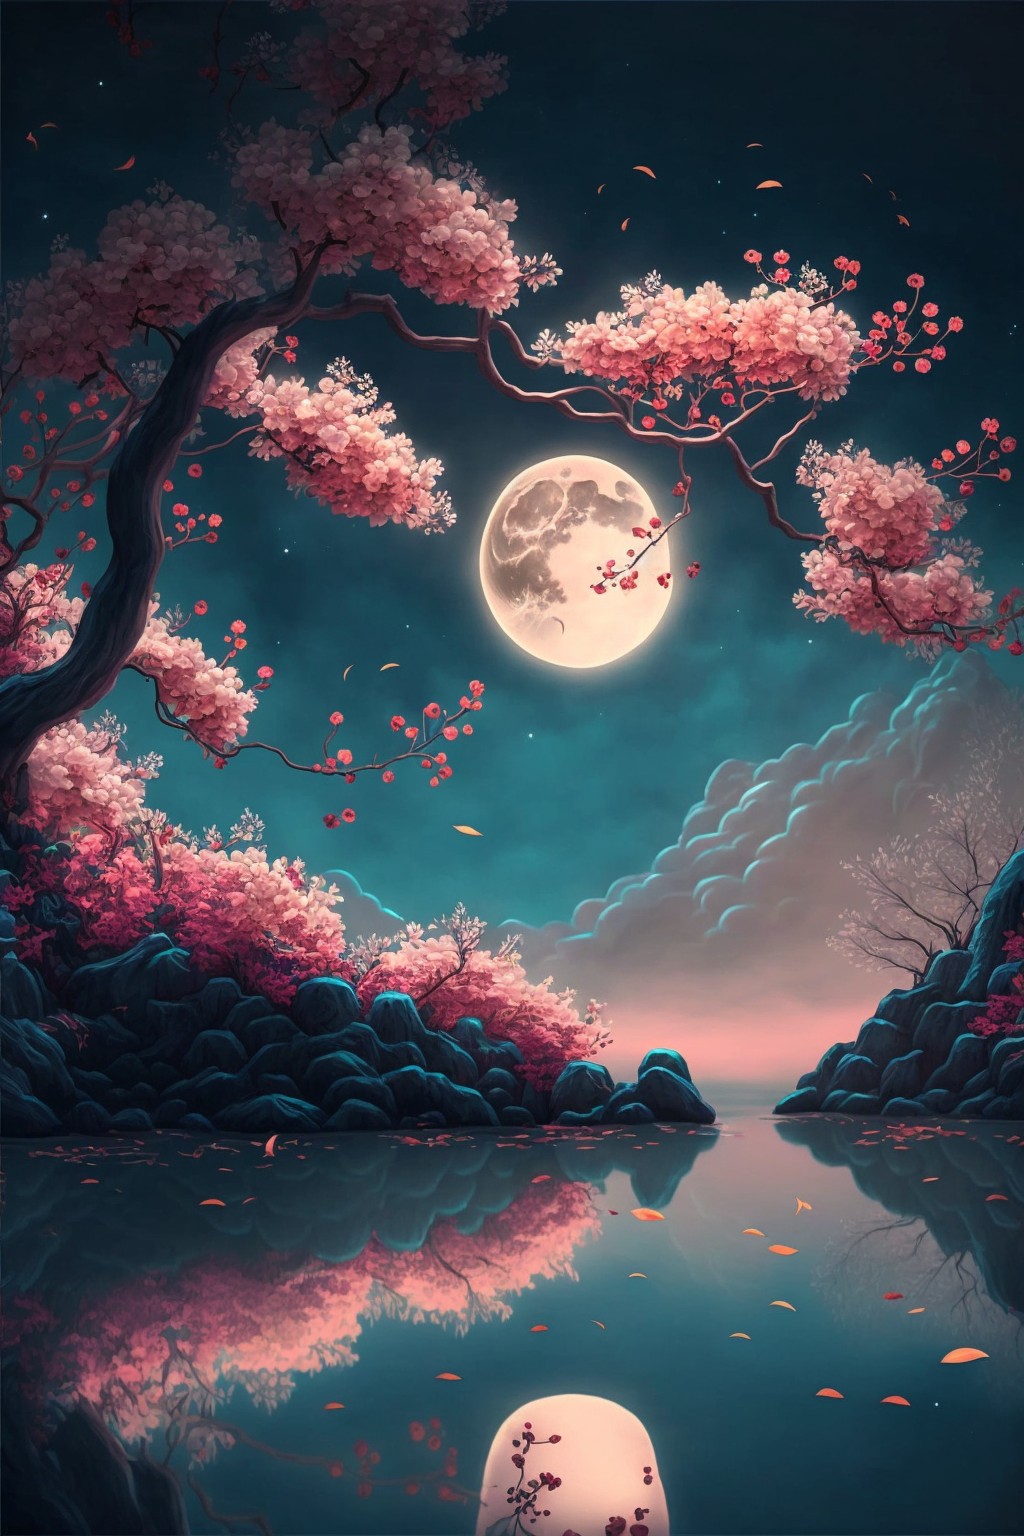 roses in the moonlight